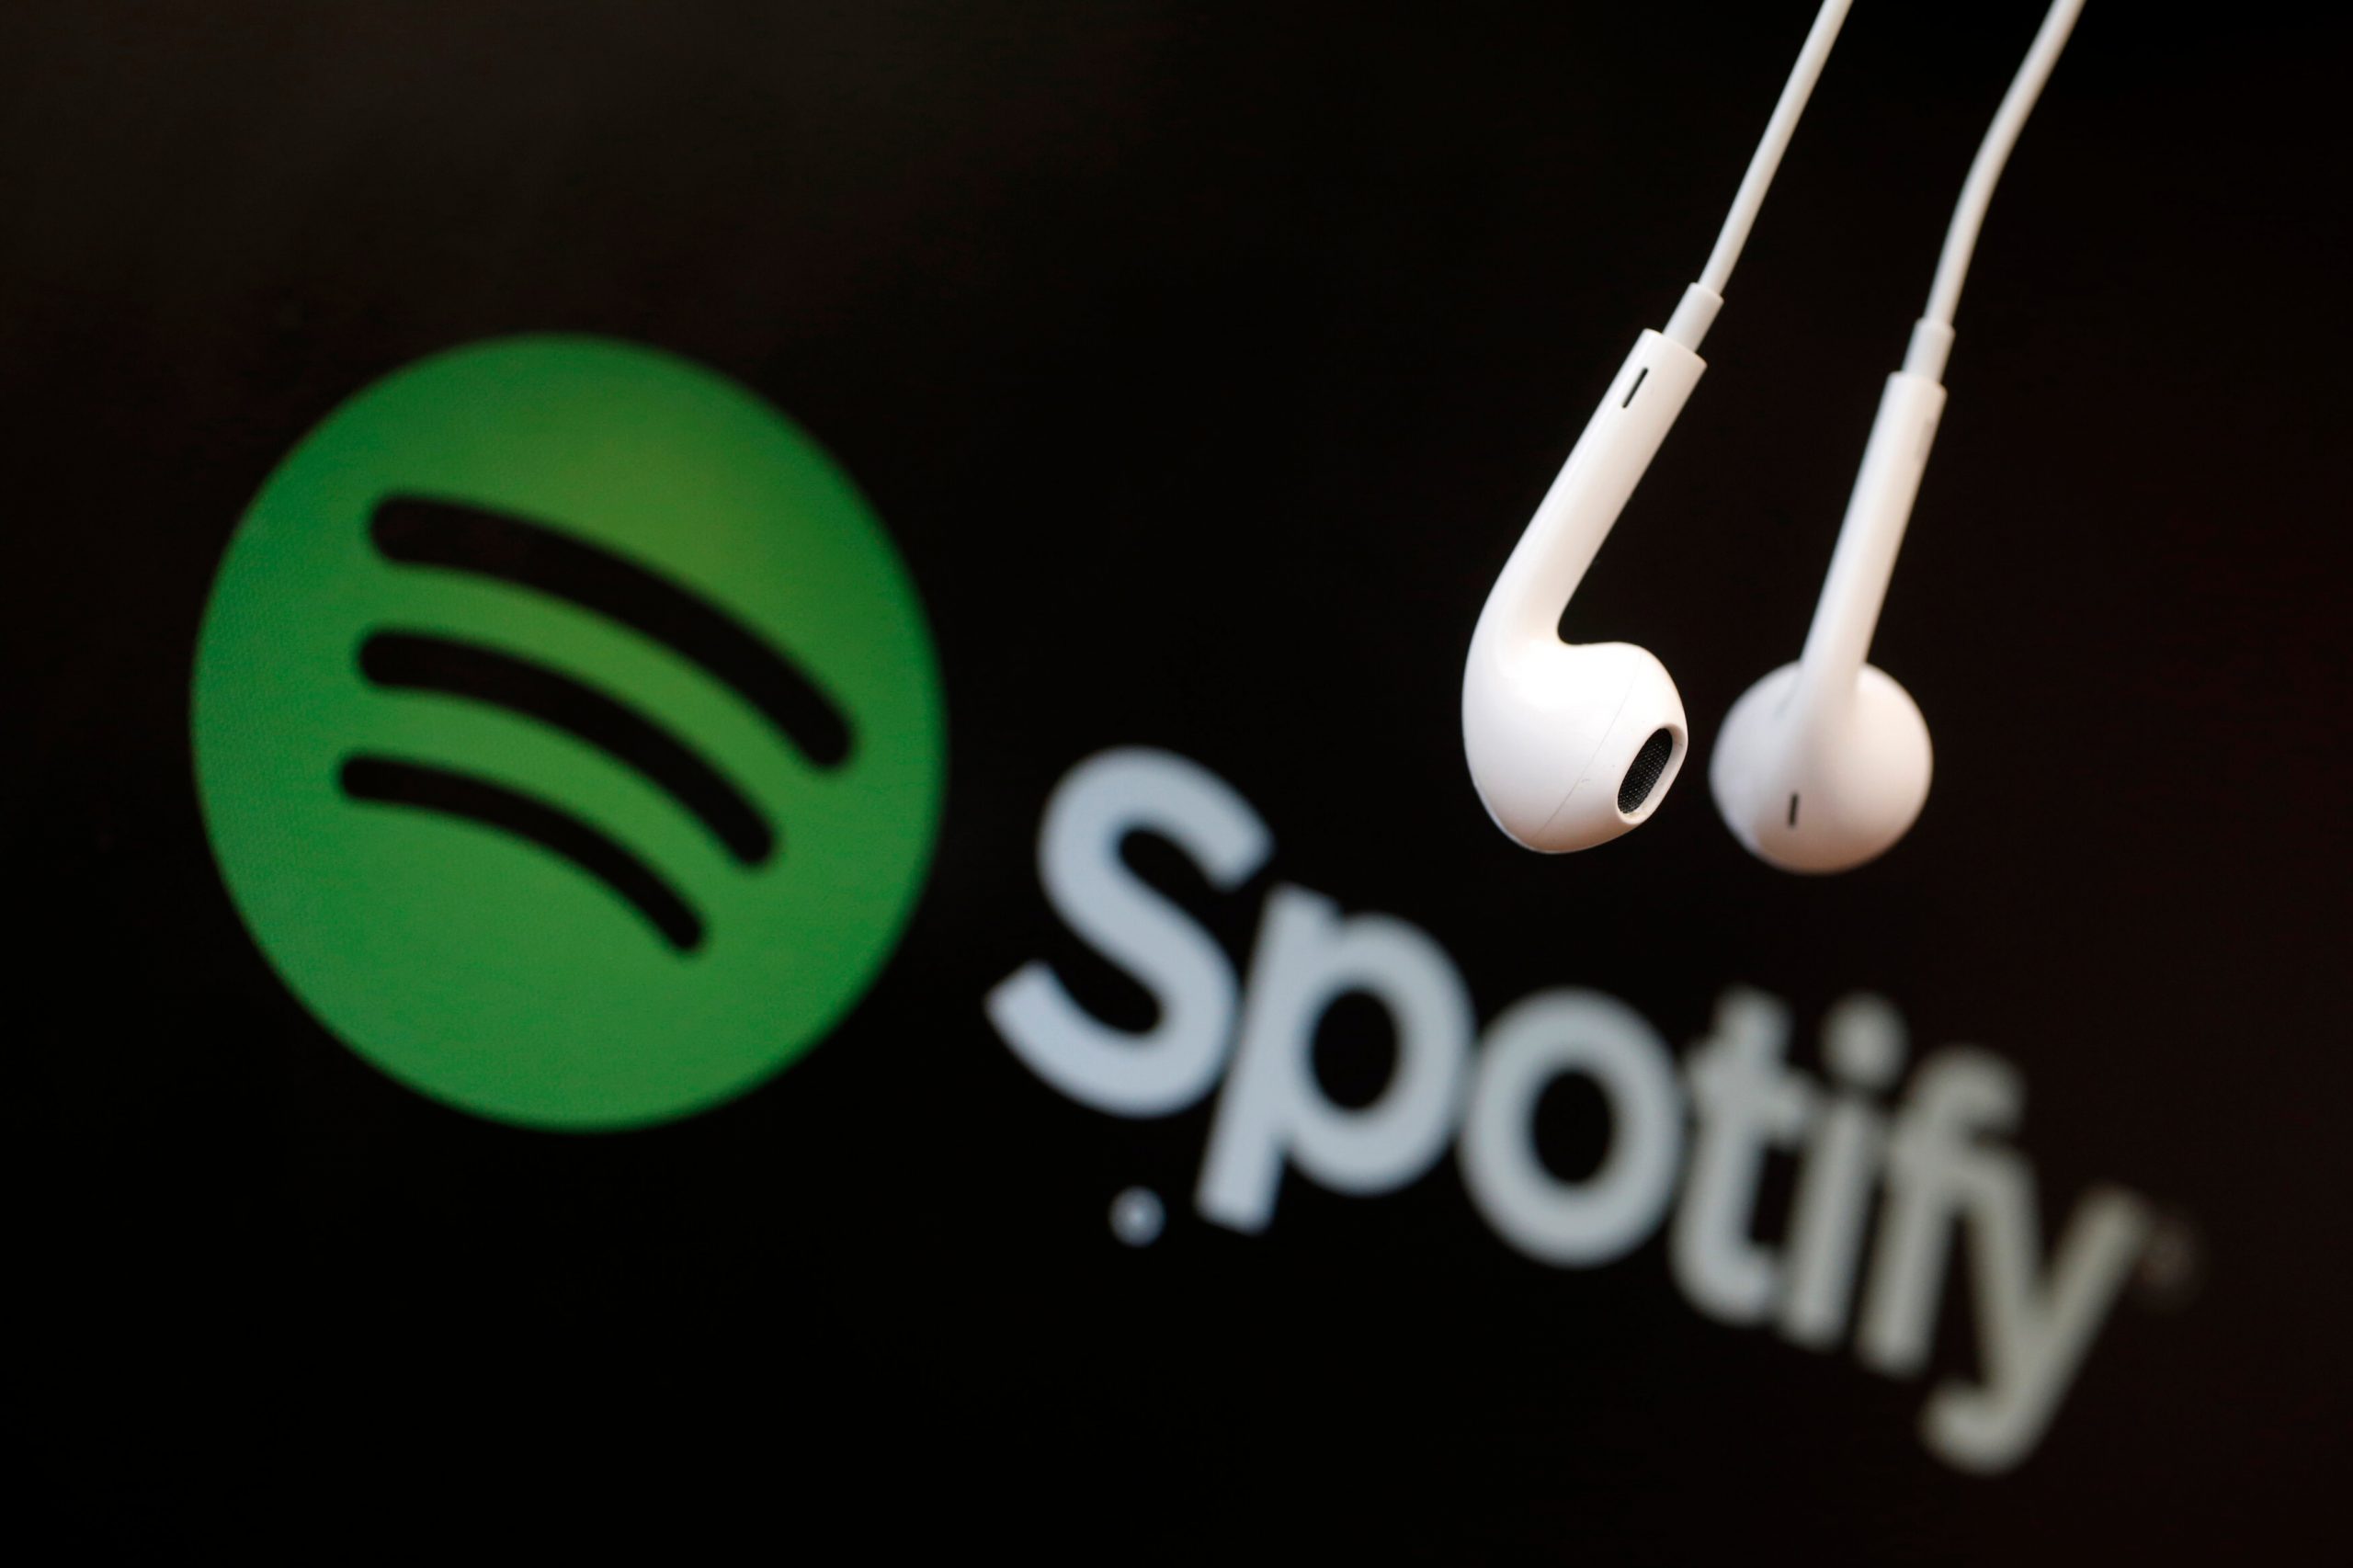 Getting to understand why spotify is embraced by artist